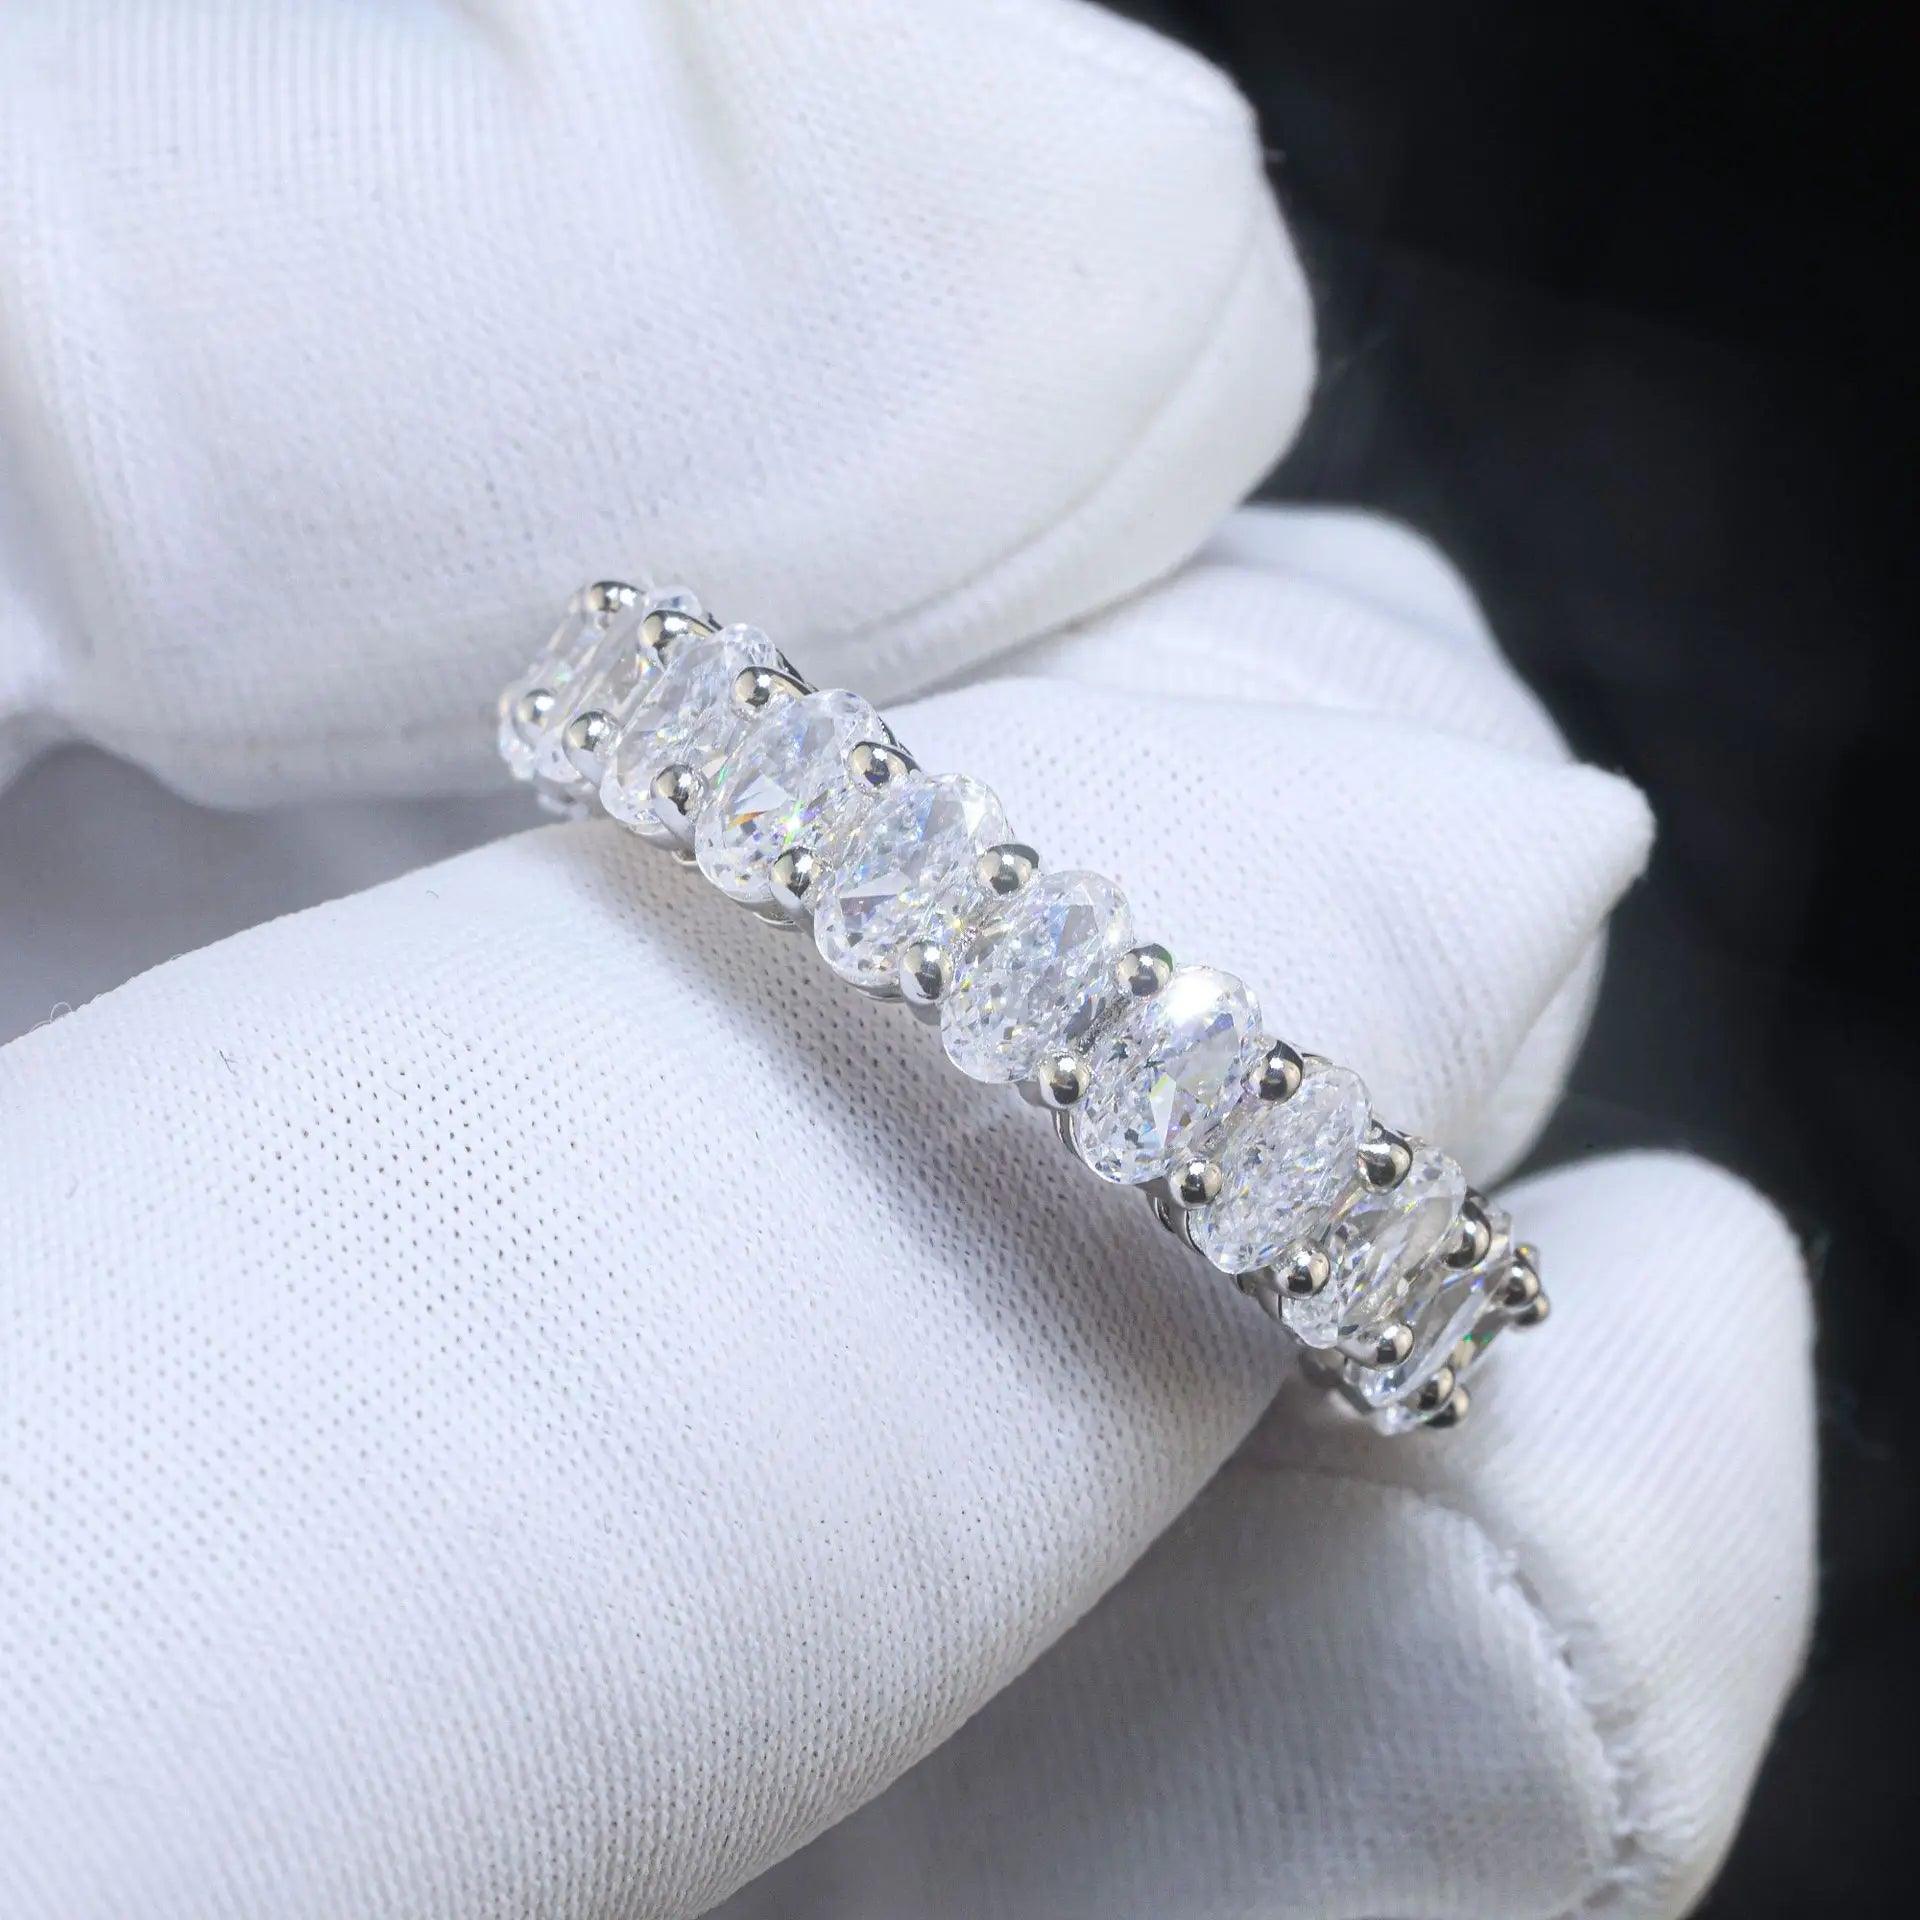 Awesome 6.6CT D Colour Oval Cut Moissanite Diamonds Eternity Classic Luxury Wedding Engagement Rings - The Jewellery Supermarket